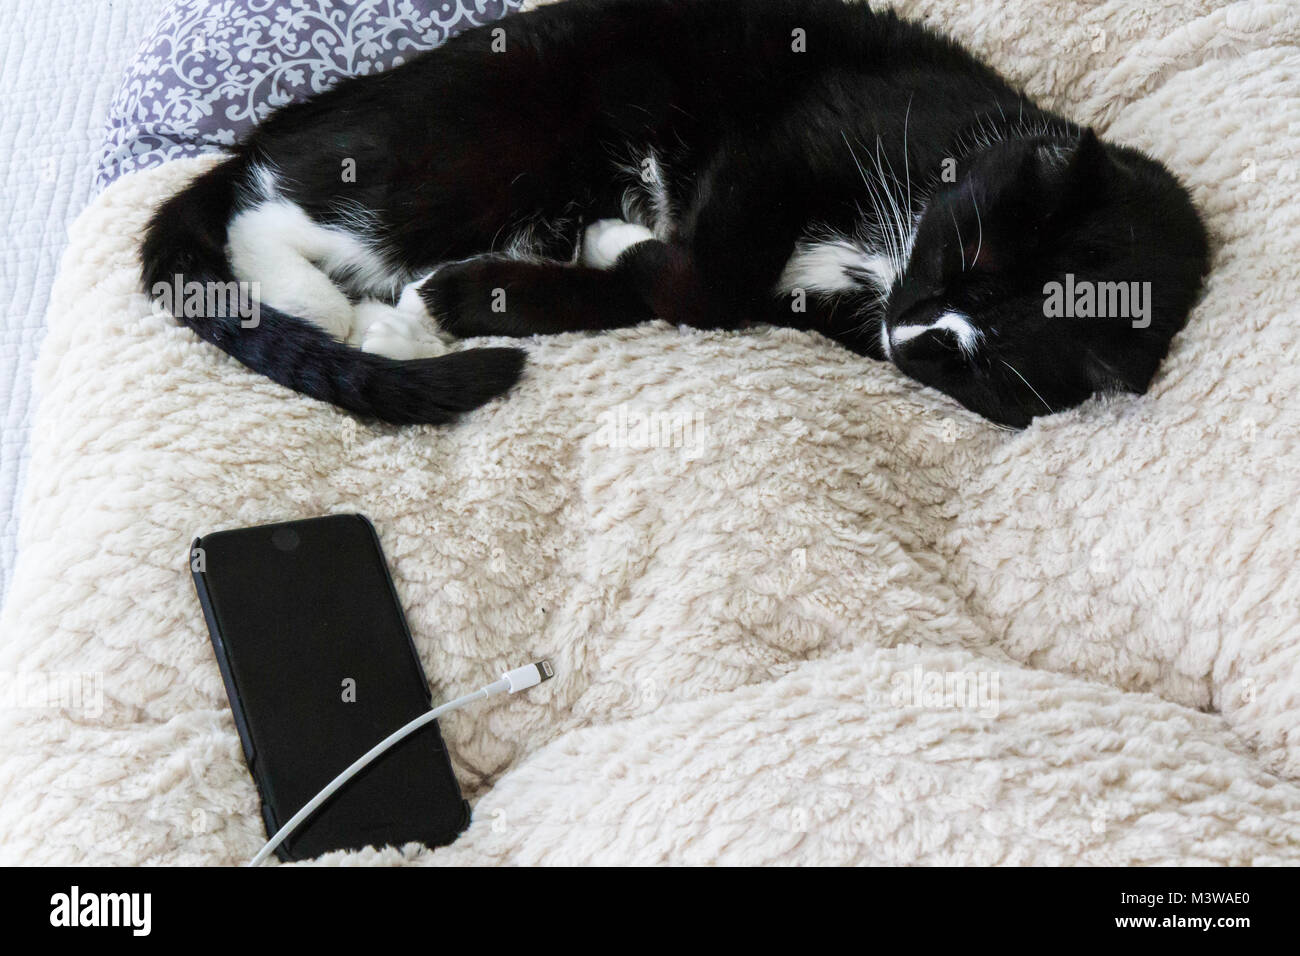 Black and White Tuxedo cat asleep on top of white bedspread next to unplugged smartphone Stock Photo